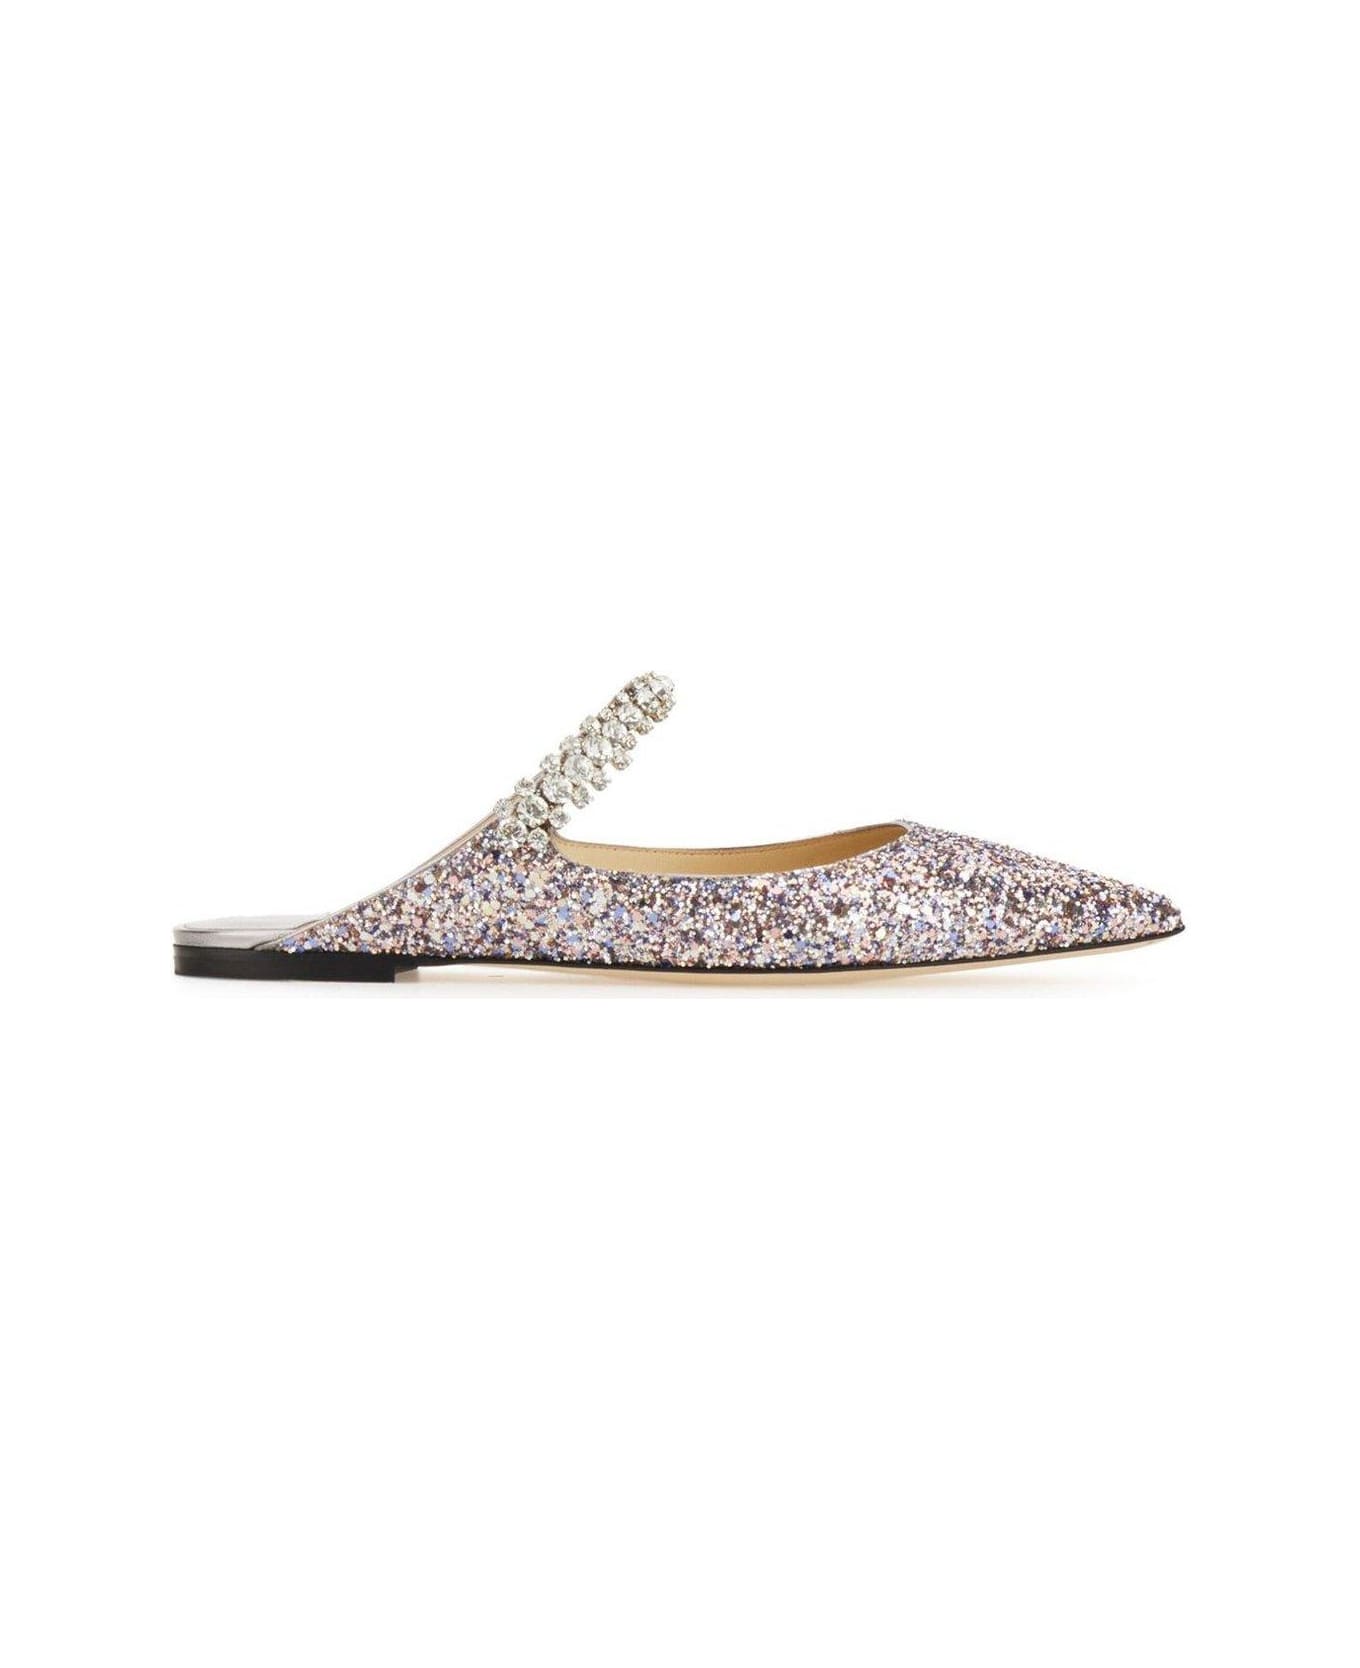 Jimmy Choo Bing Embellished Pointed Toe Ballerina Shoes xti - Silver